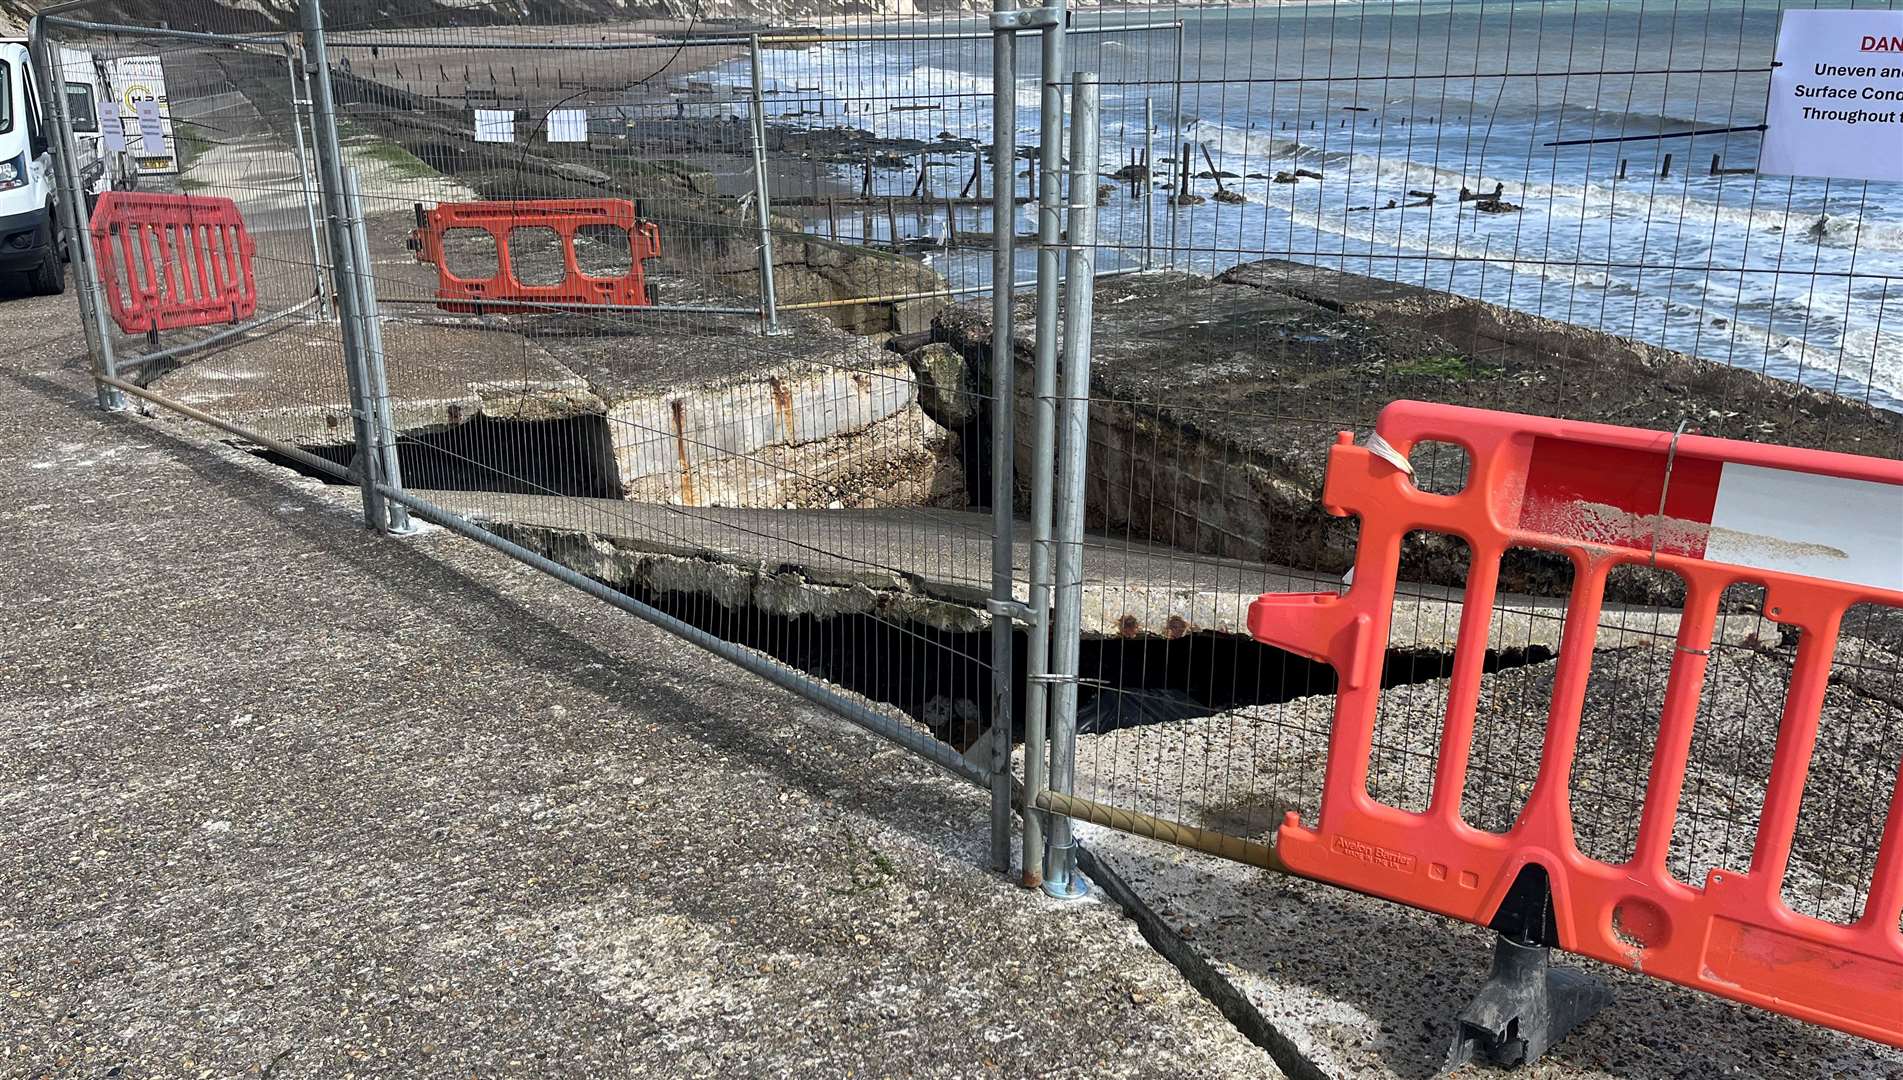 More severe damage to Folkestone Warren appeared this week and has led to crews from Network Rail closing off the area to the public